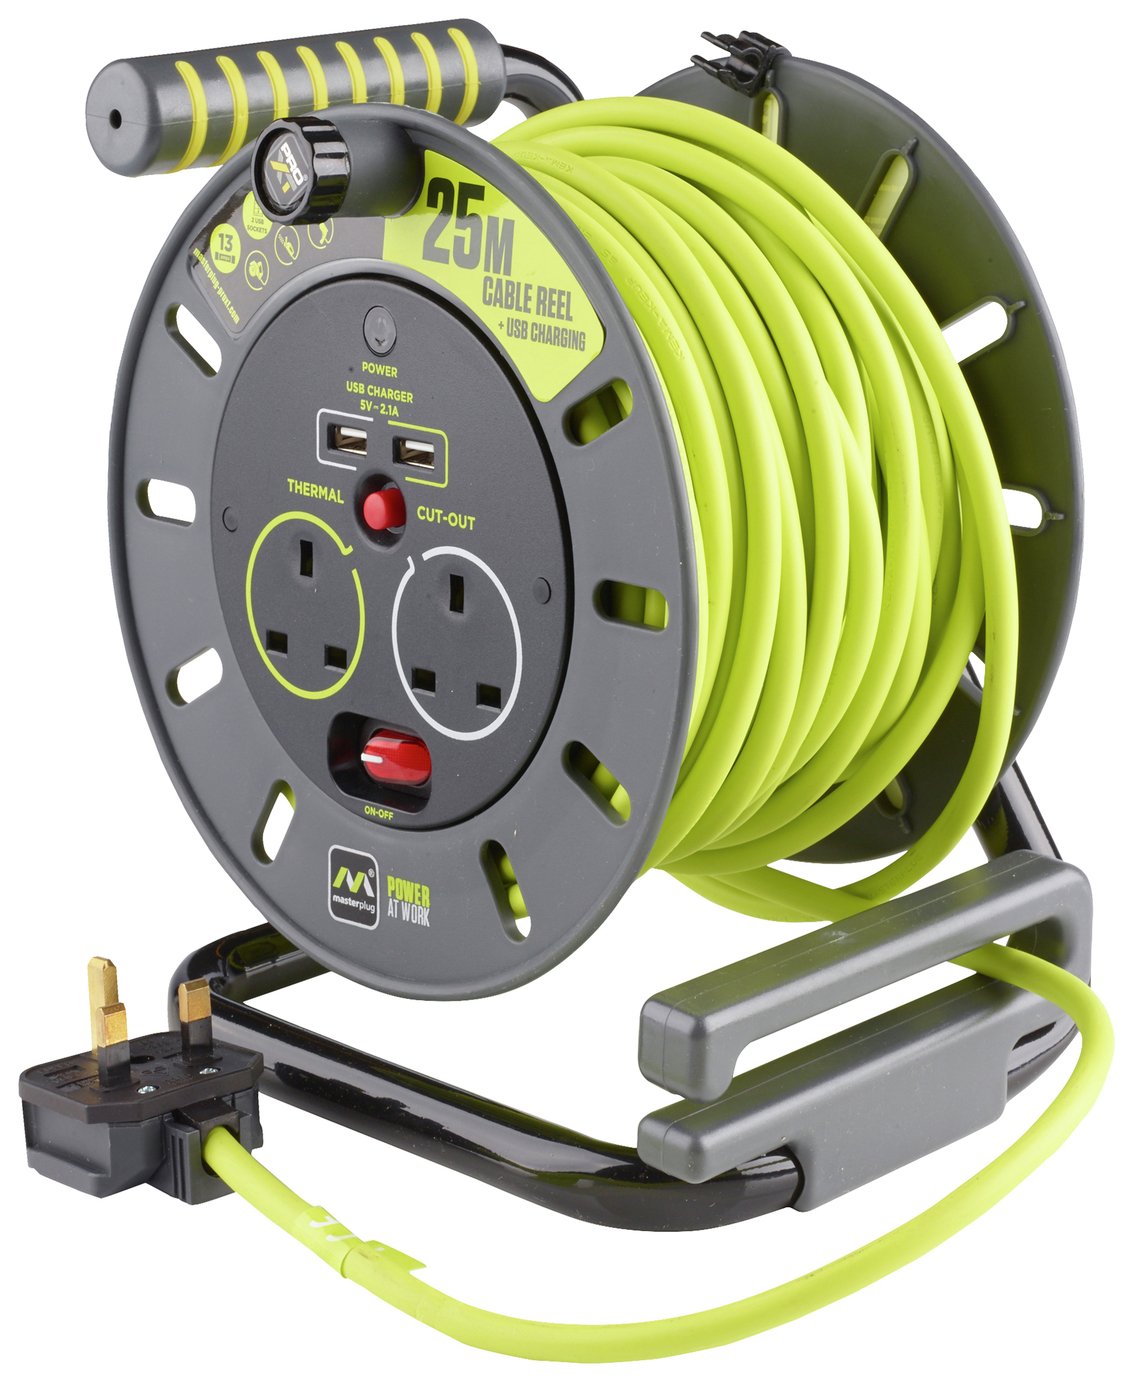 Masterplug Pro-XT 4 Socket 4 Switch Cable Reel review